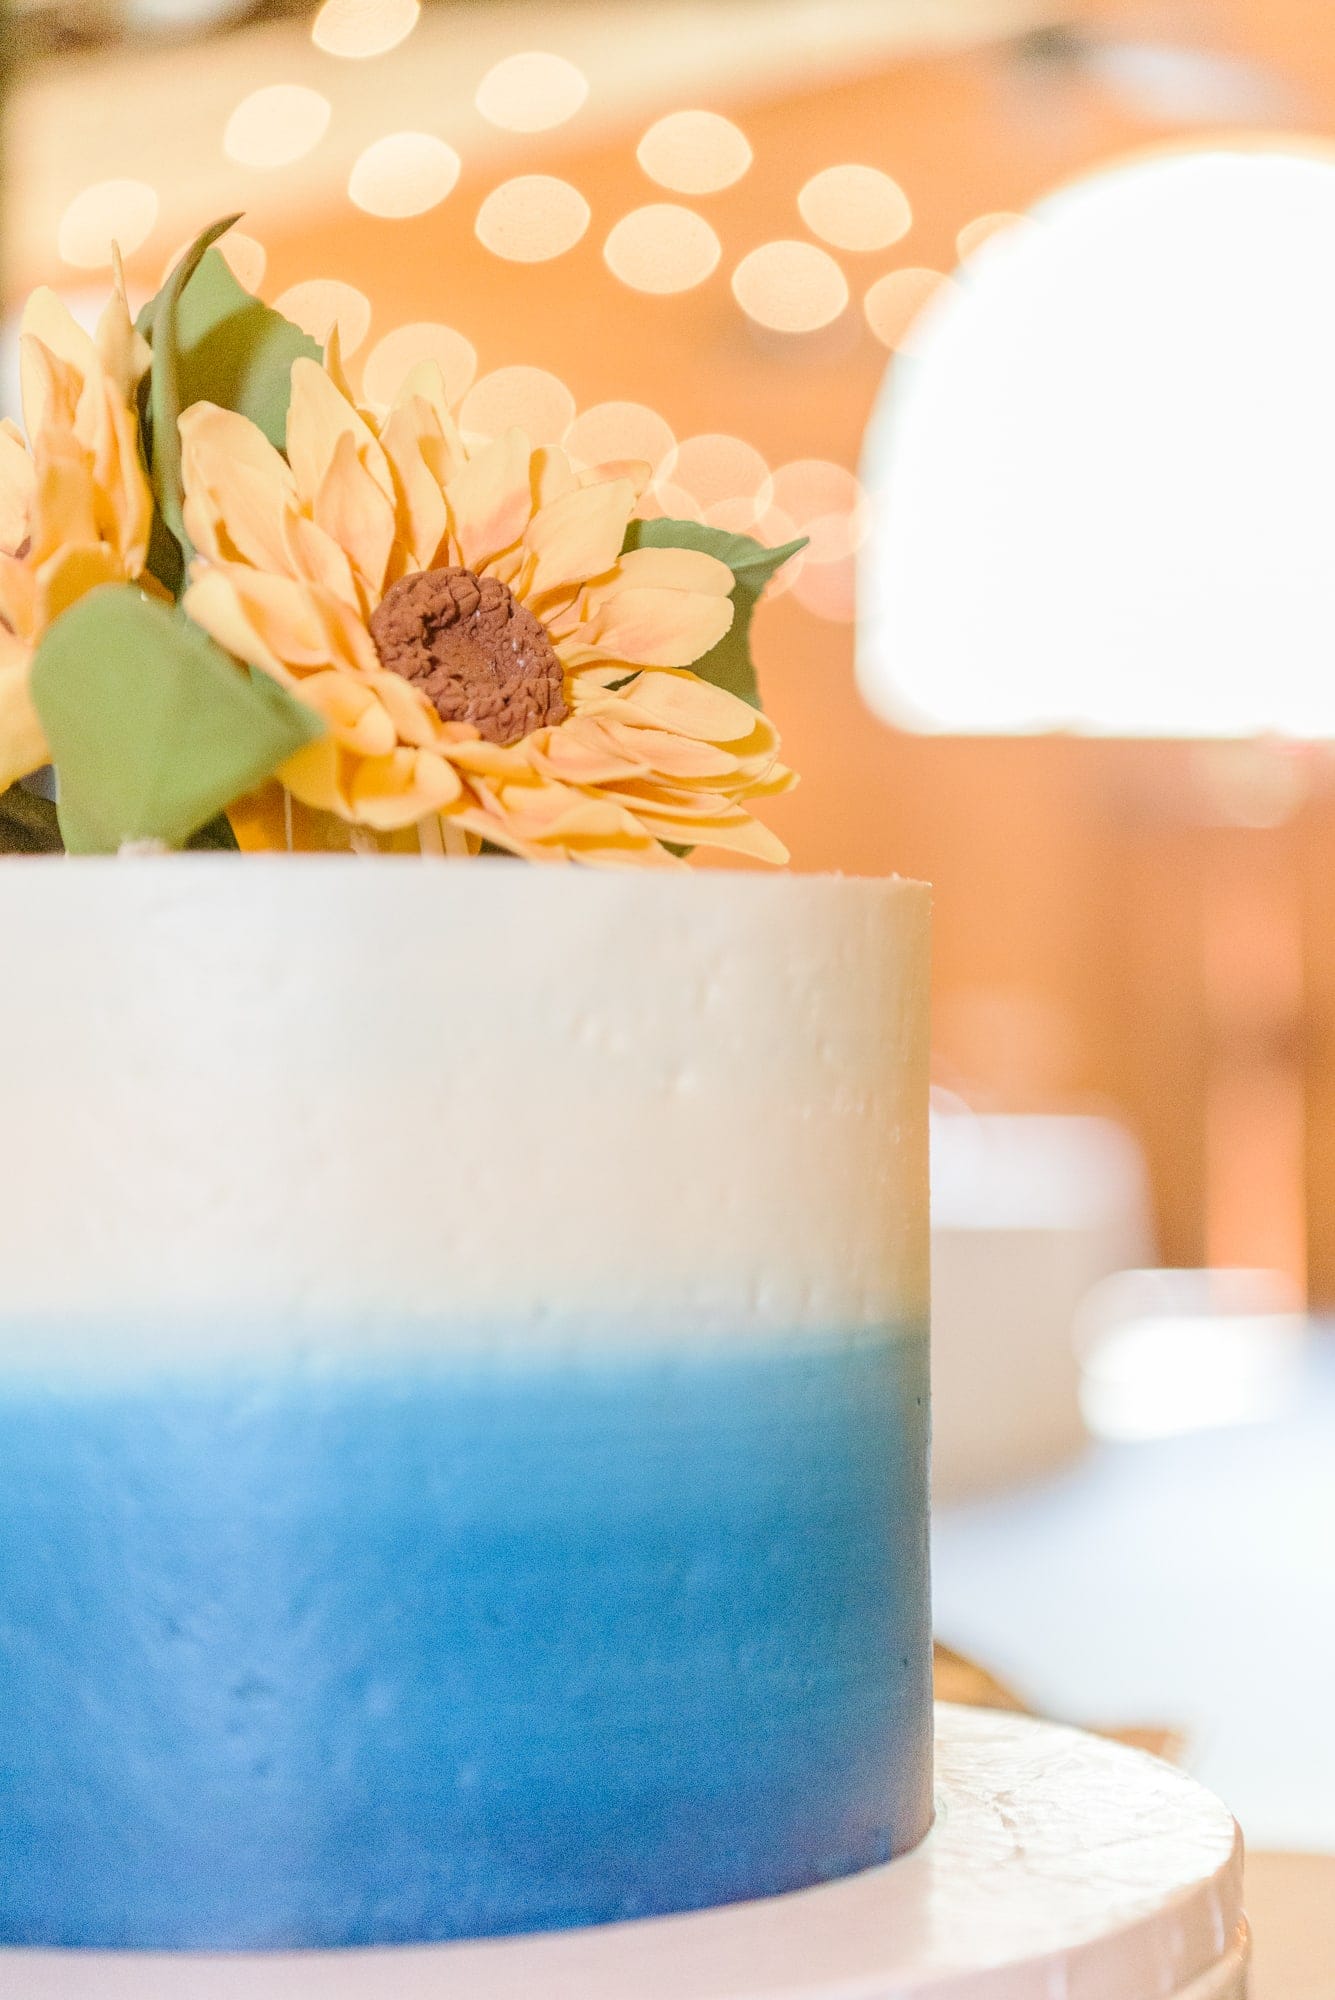 This simple blue and white ombre cake with sunflowers fit the Alexander Homestead aesthetic perfectly.